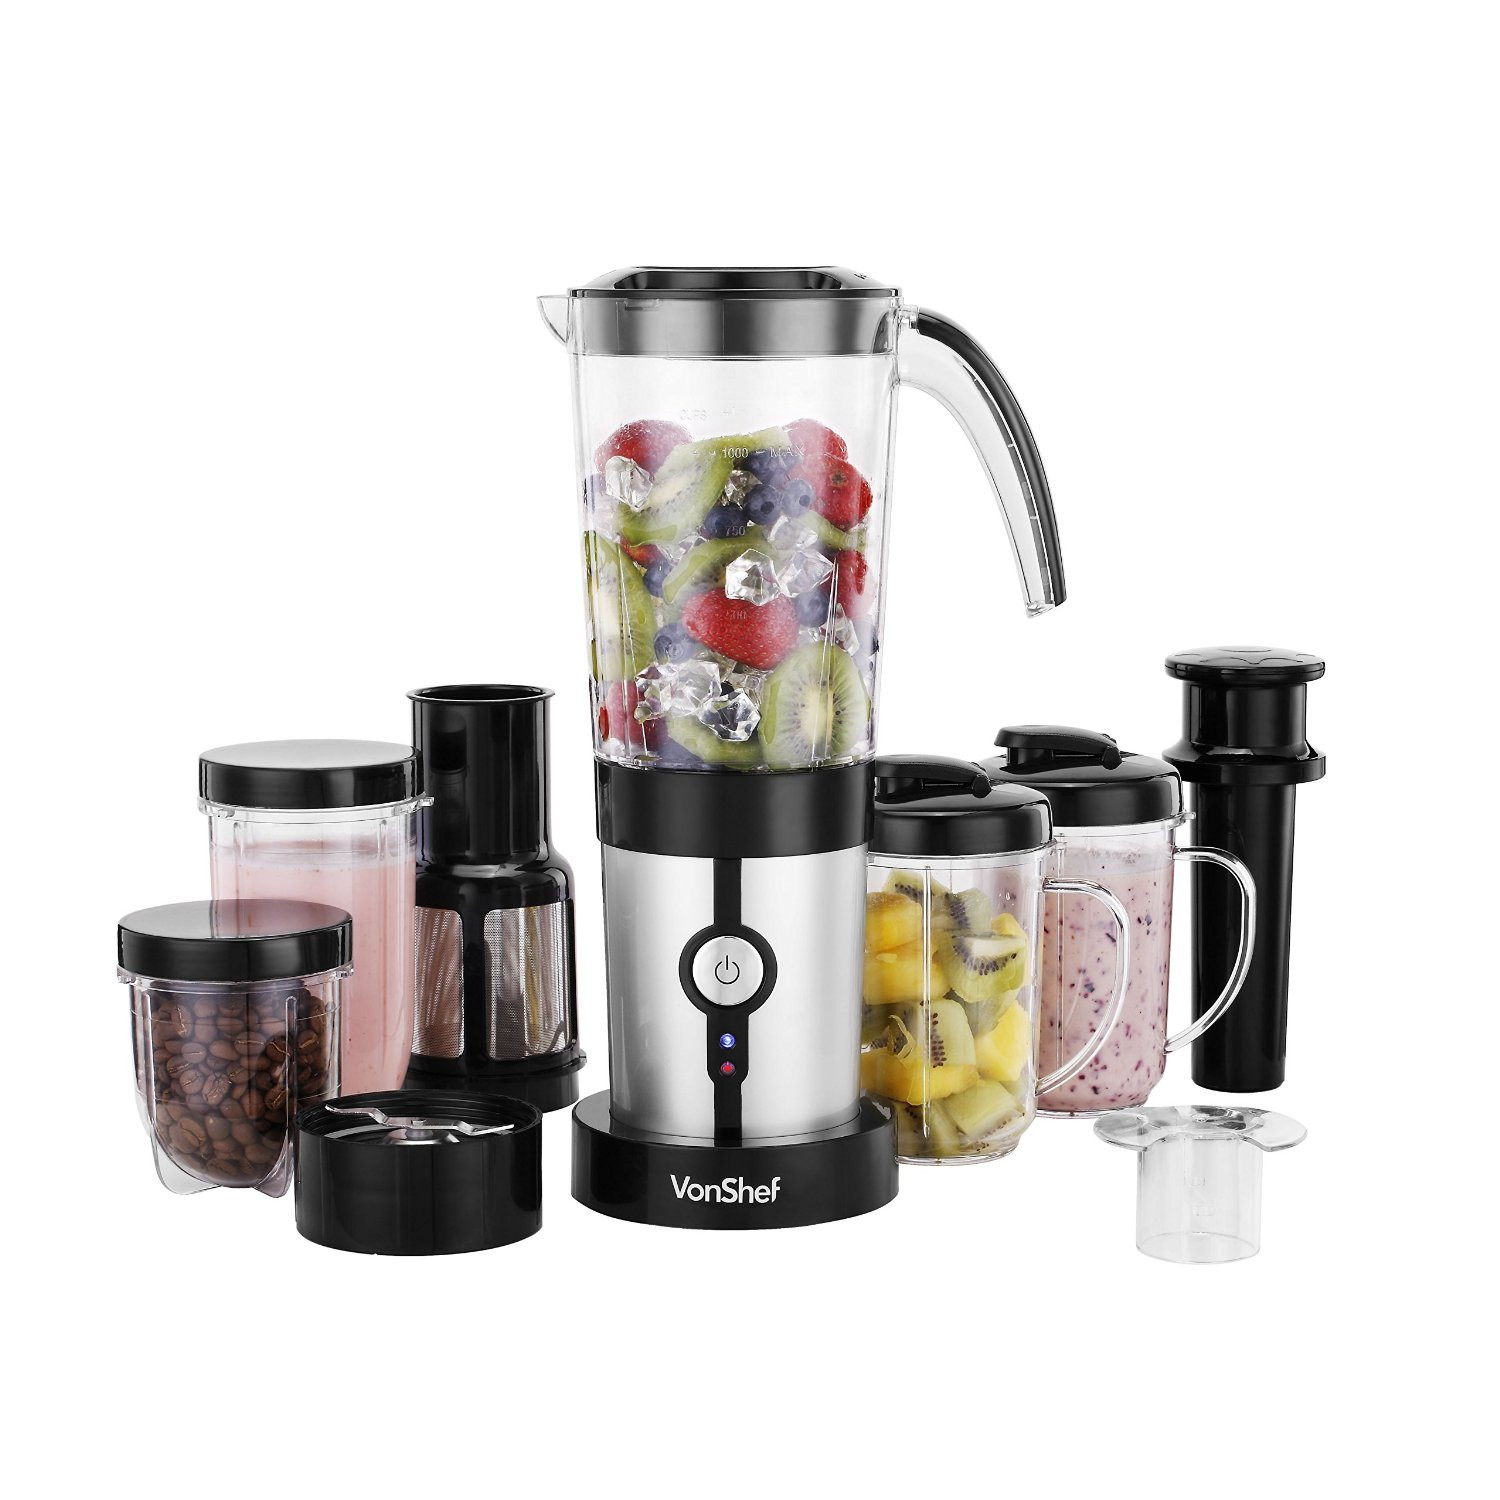 Blenders For Smoothies
 15 Best Smoothie Makers & Blenders for Delicious Smoothies